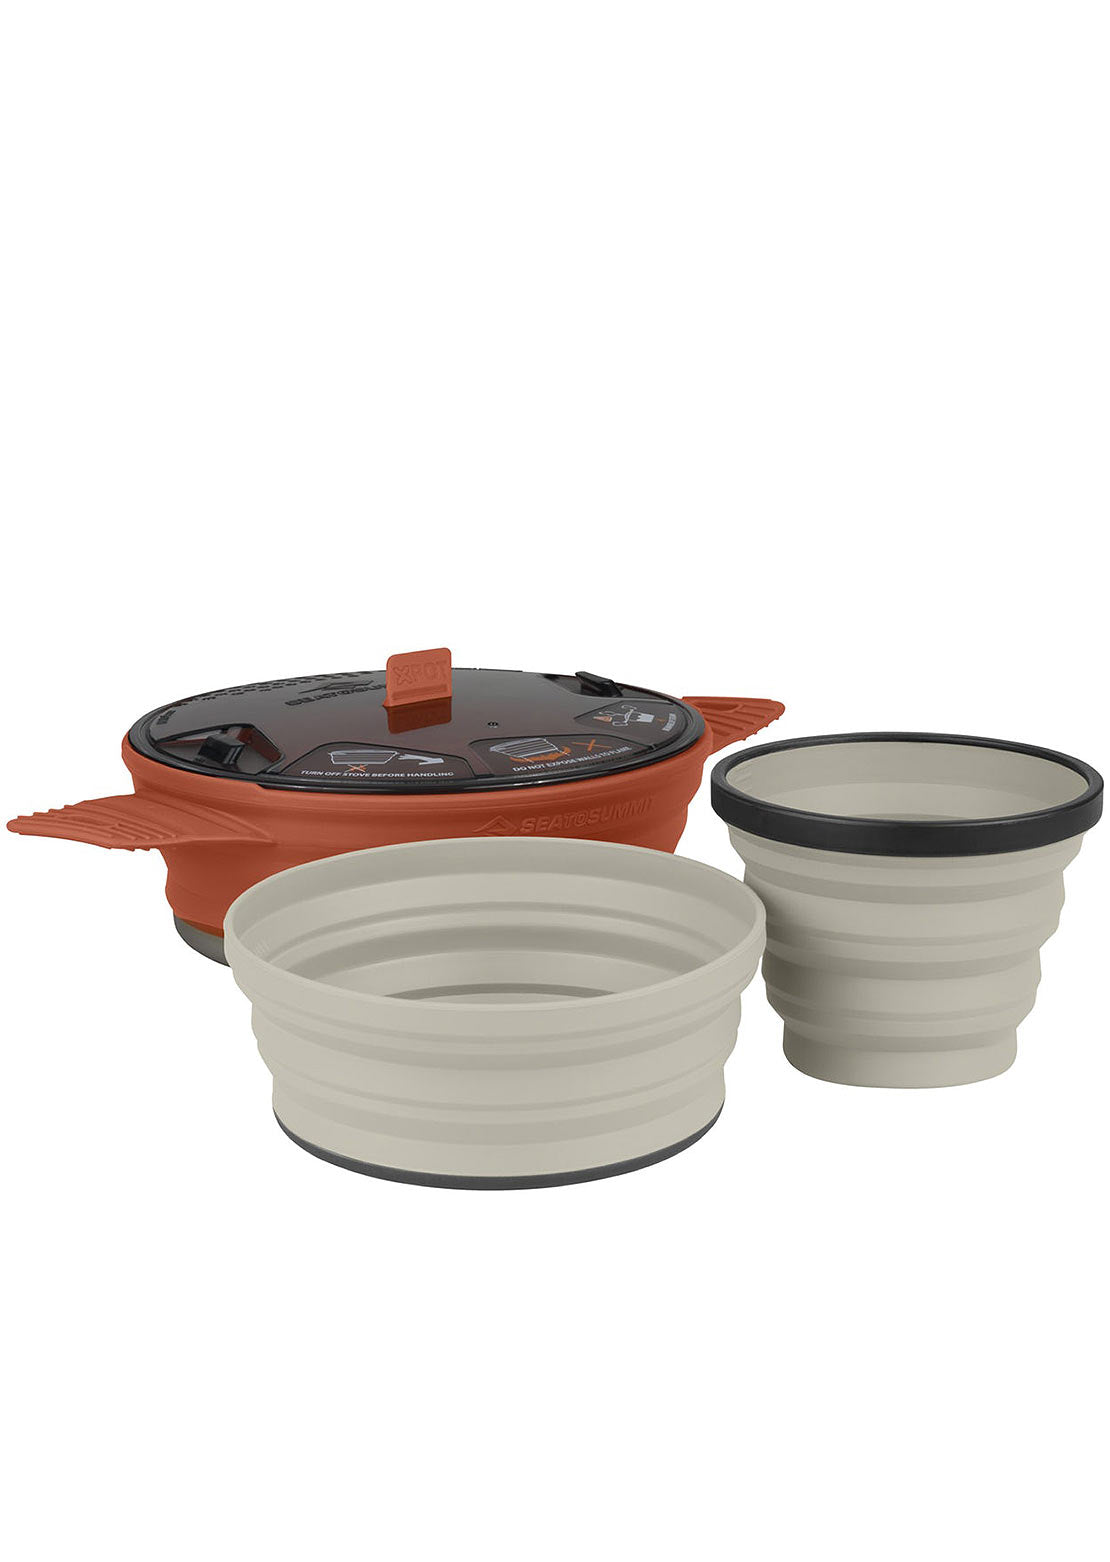 Sea To Summit X Set 21 - 3 Piece Collapsible Cook Set